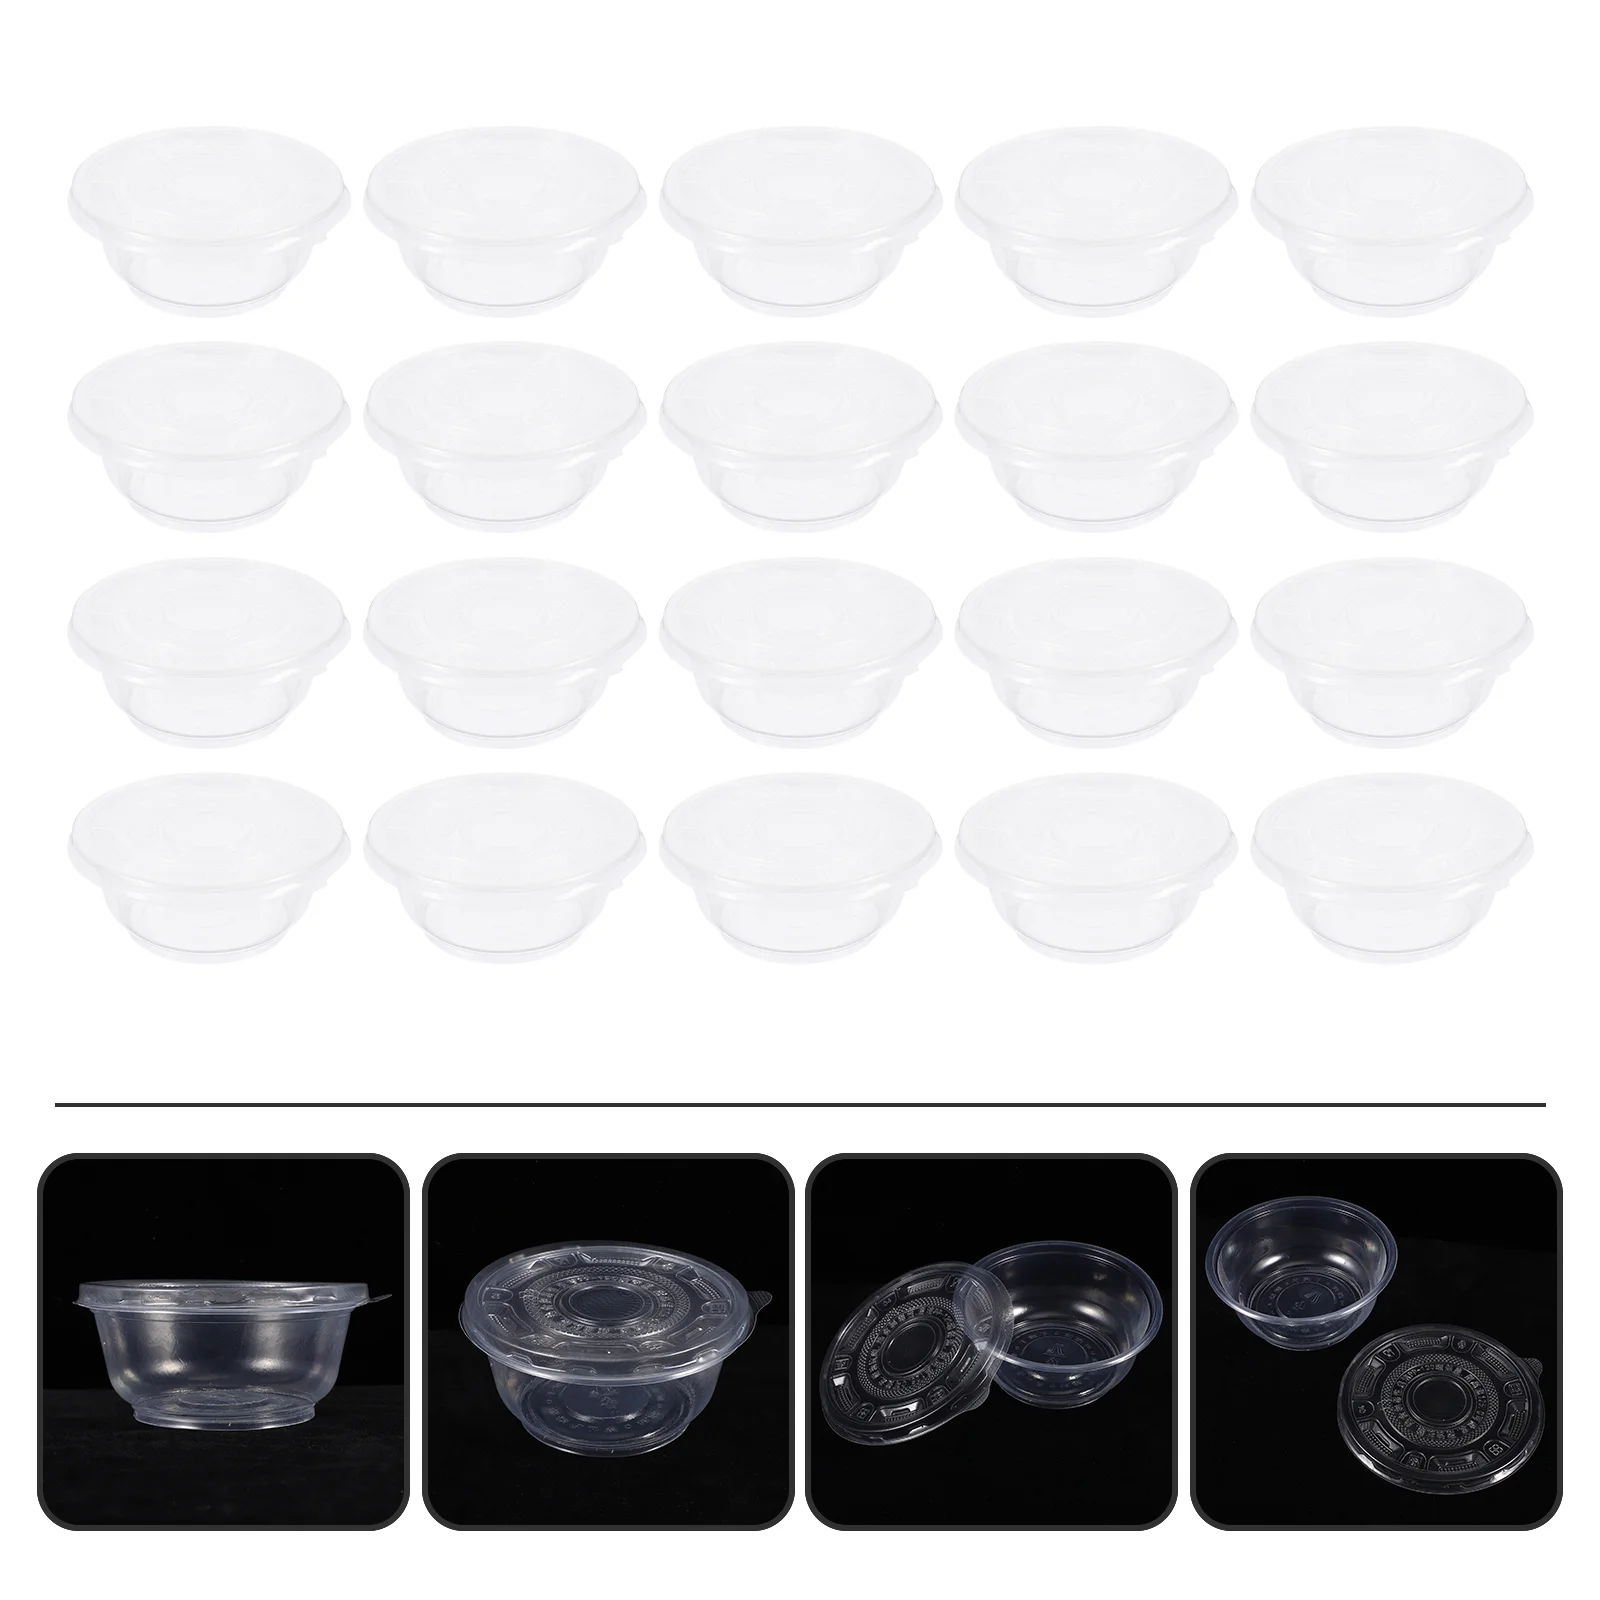 

50 Sets Round Bowl Lid Lunch Box Plastic Dessert Bowls Disposable Food Containers Small Lids Takeaway